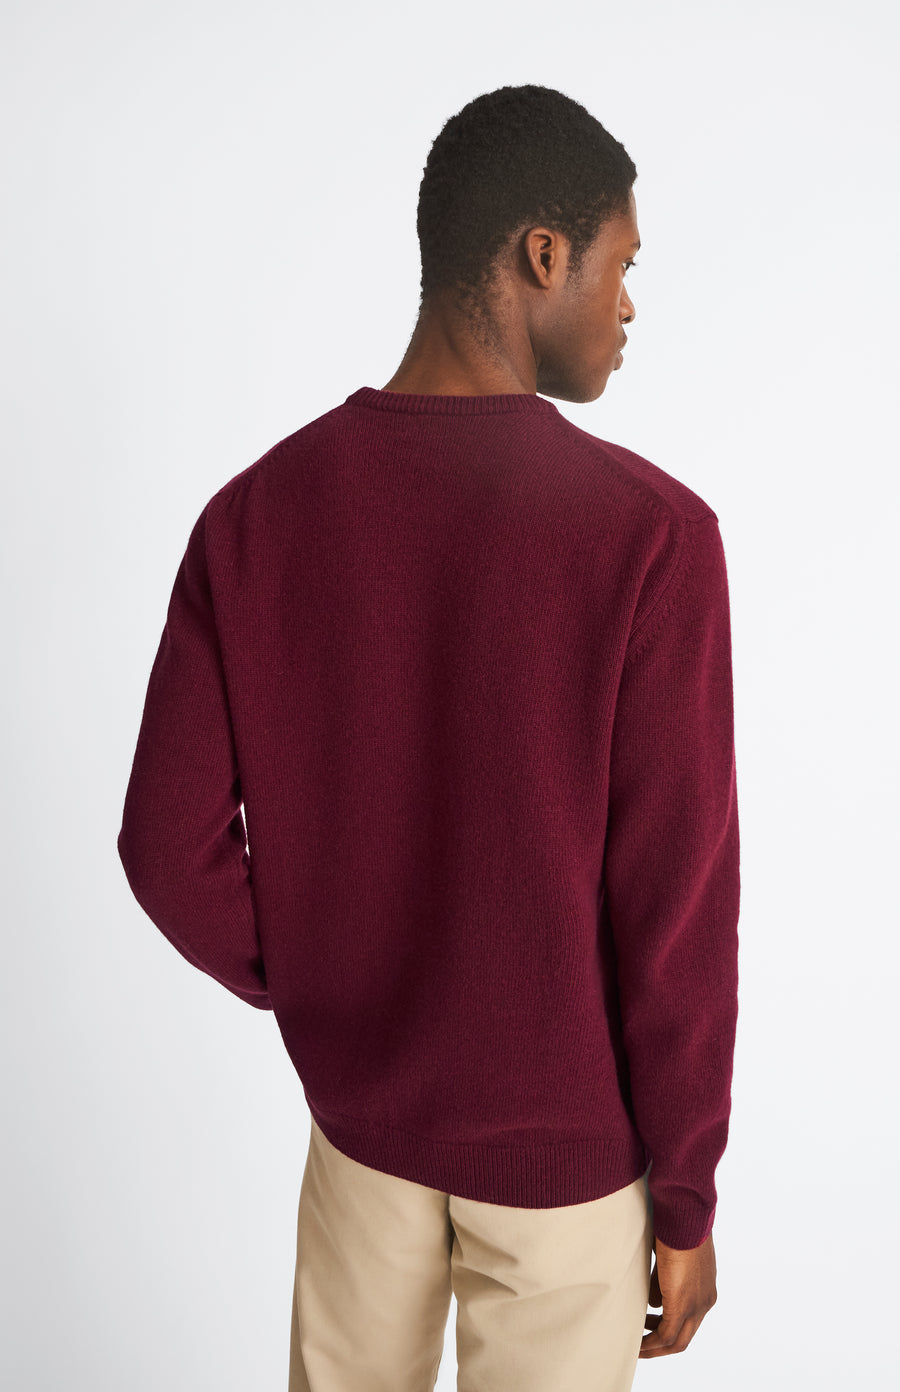 Pringle of Scotland Archive Men's Round Neck Lambswool Jumper in Claret rear view